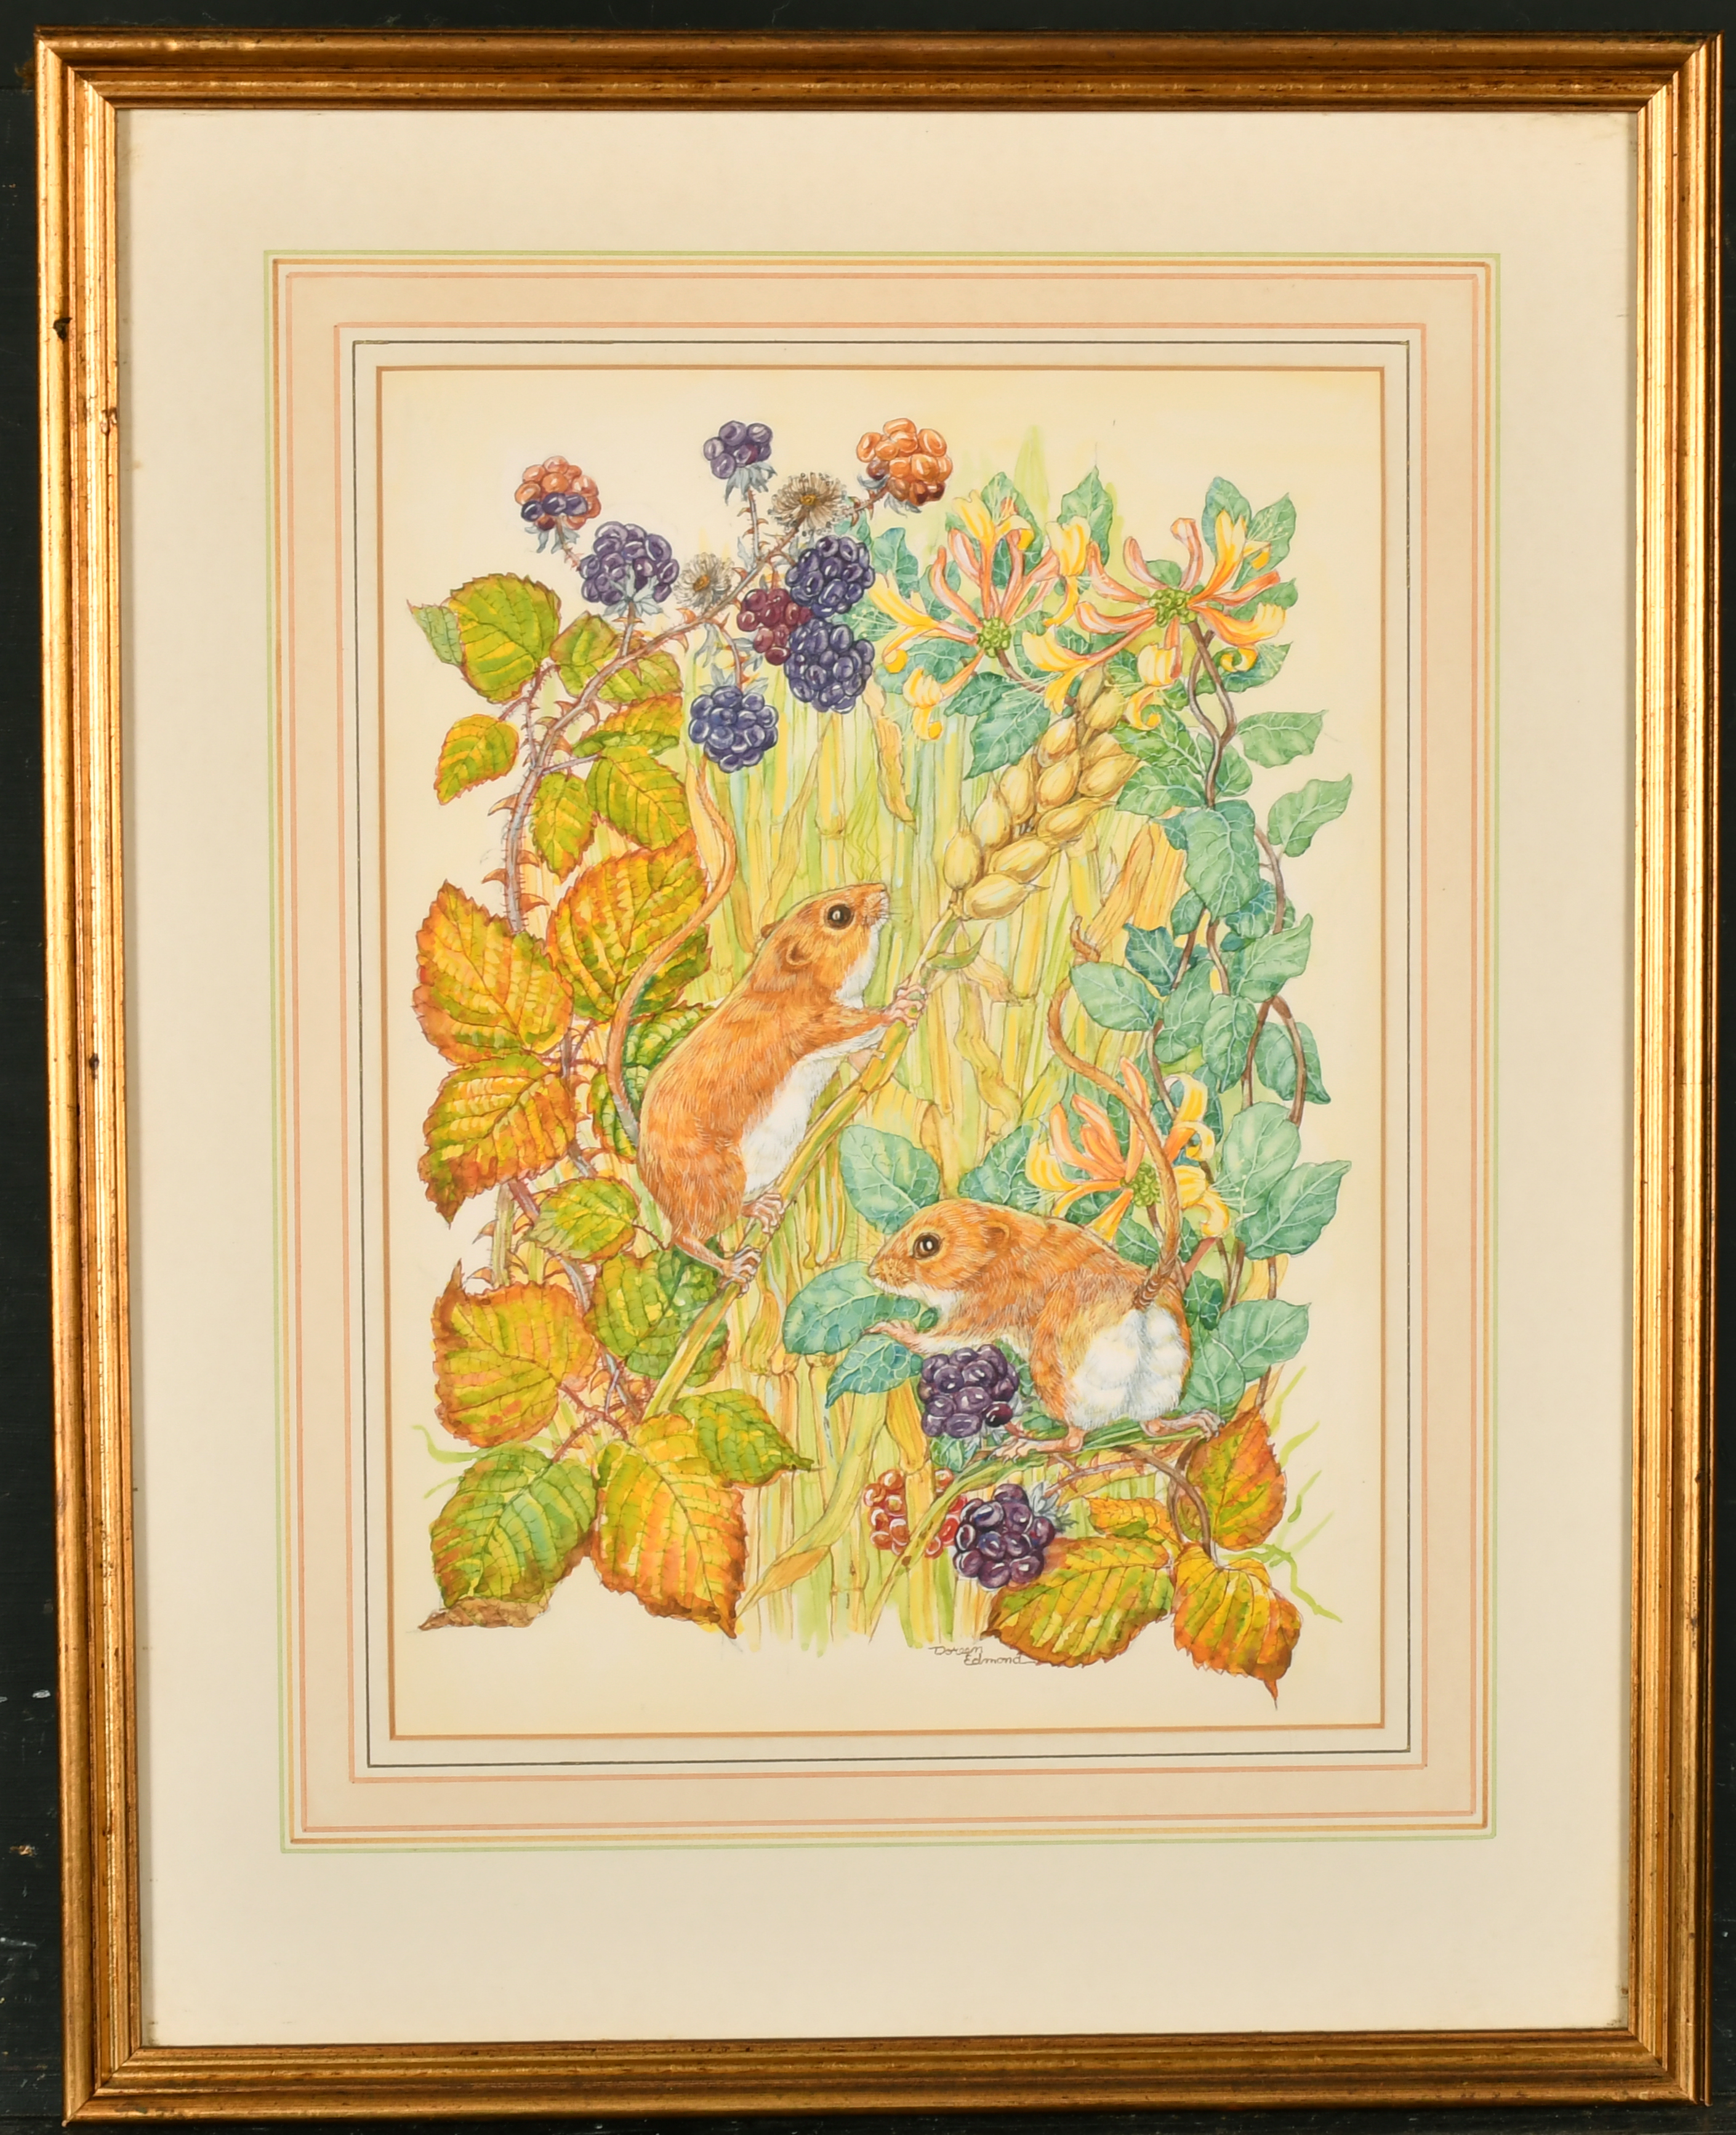 Doreen Edmond (20th Century) British. Mice in the Undergrowth, Watercolour, Signed, 12.75" x 9. - Image 2 of 6